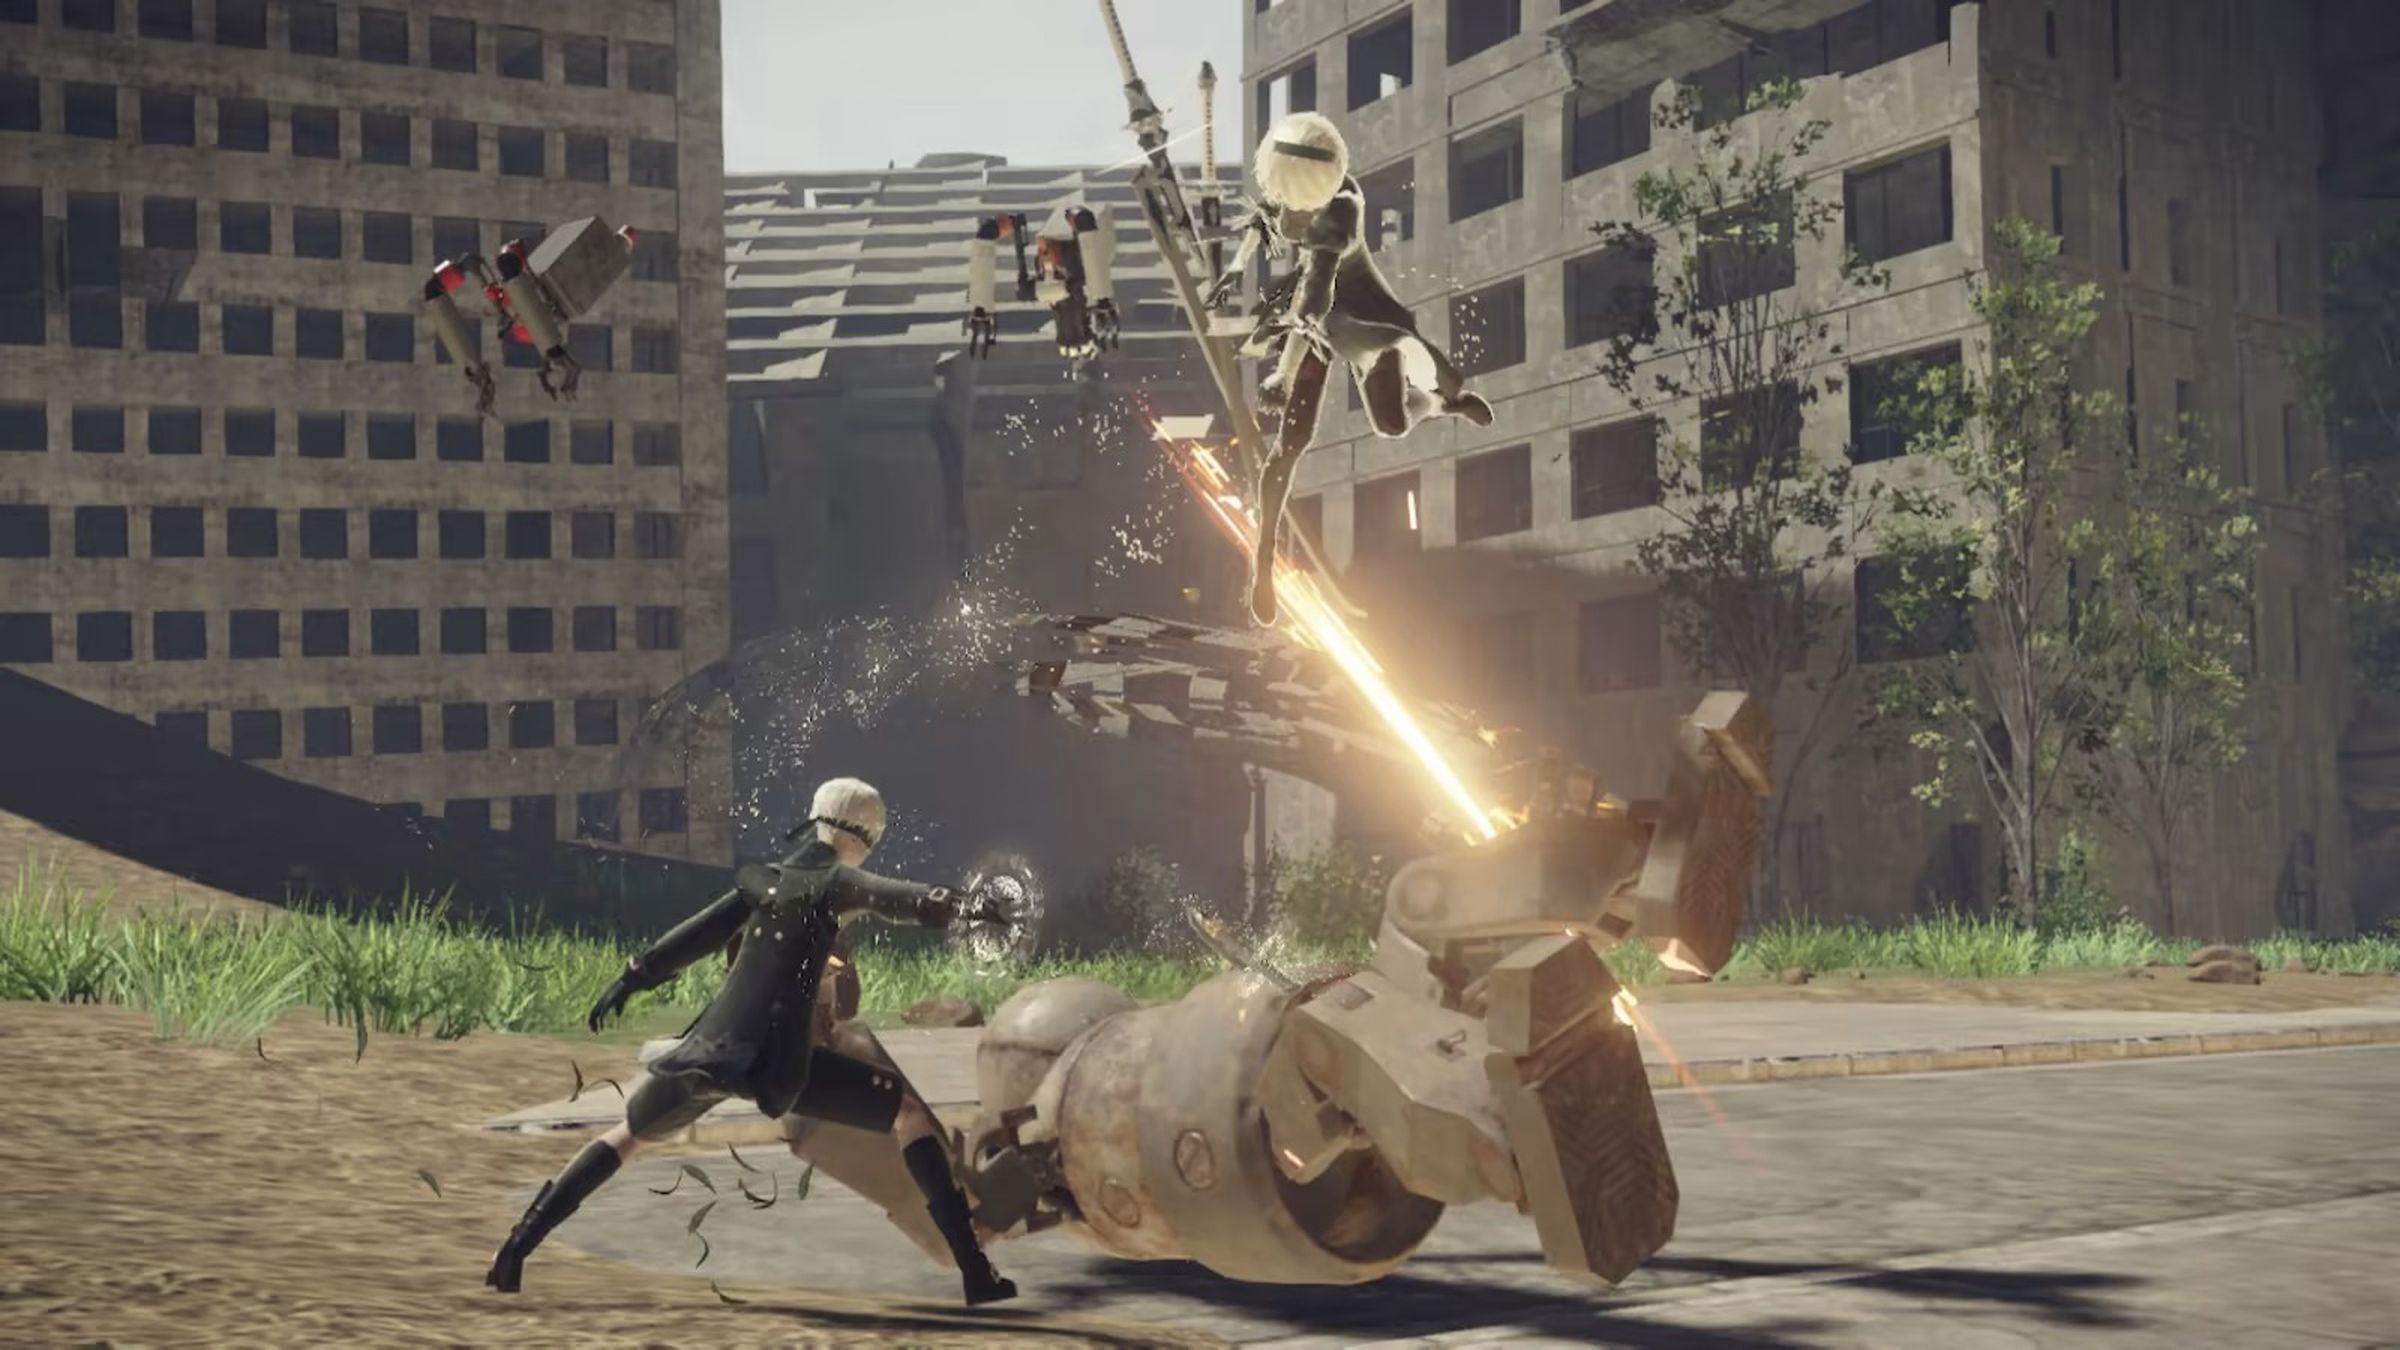 A man in black battled a mechanical creature with empty buildings in background.